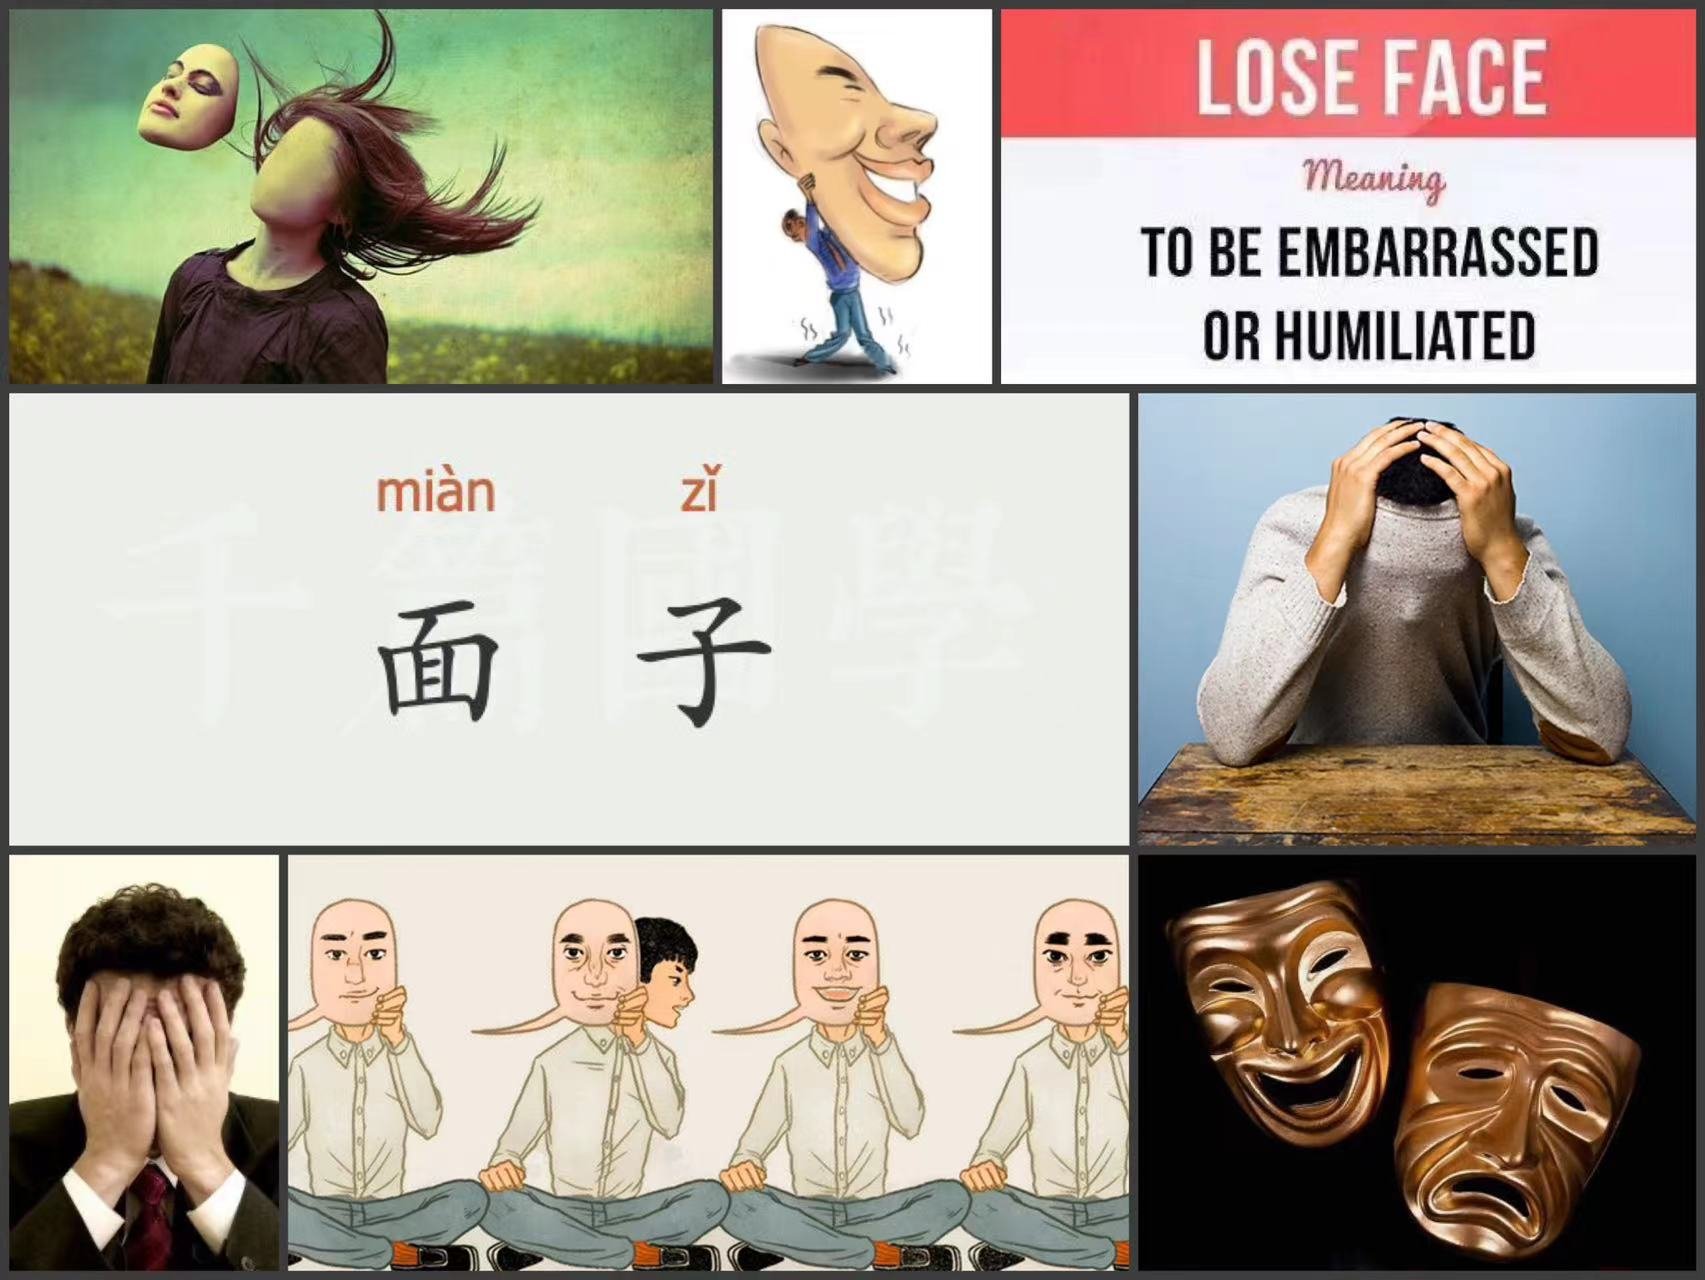 The thing Zhou Yan would miss the least if she left China: The concept of 面子 [Miànzi], and 'losing face'.